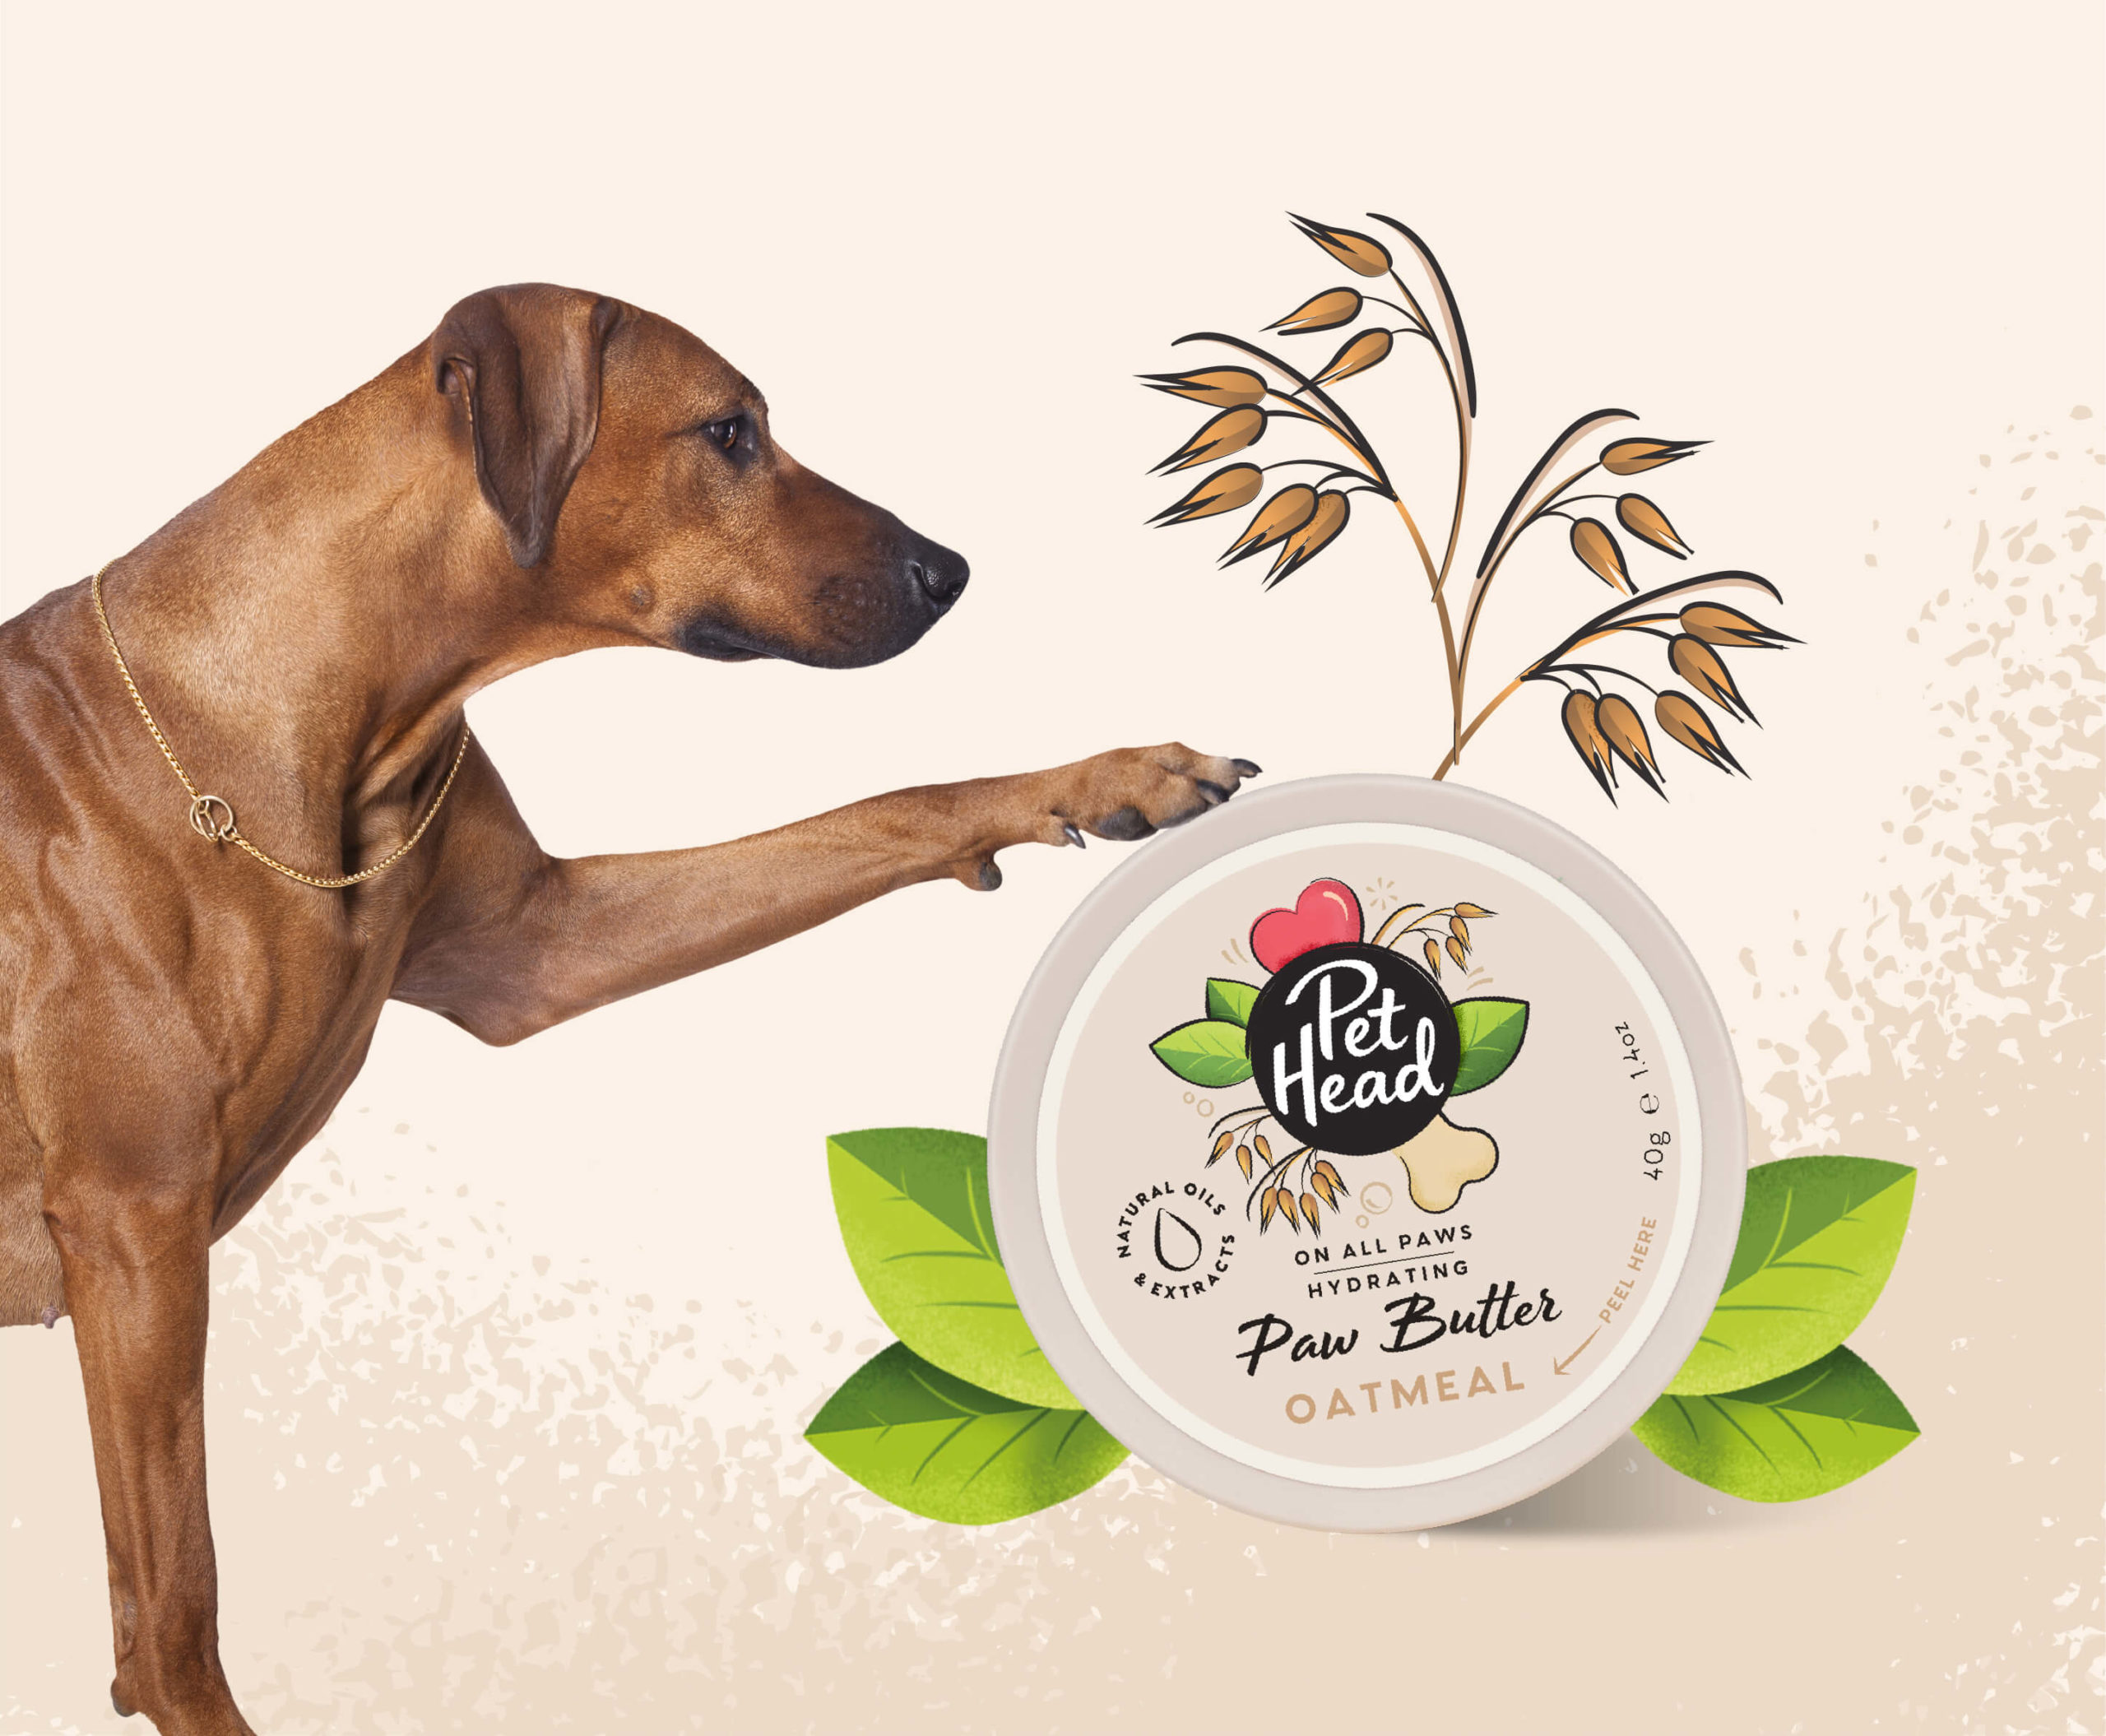 Ridgeback putting his paw on a giant tub of paw butter